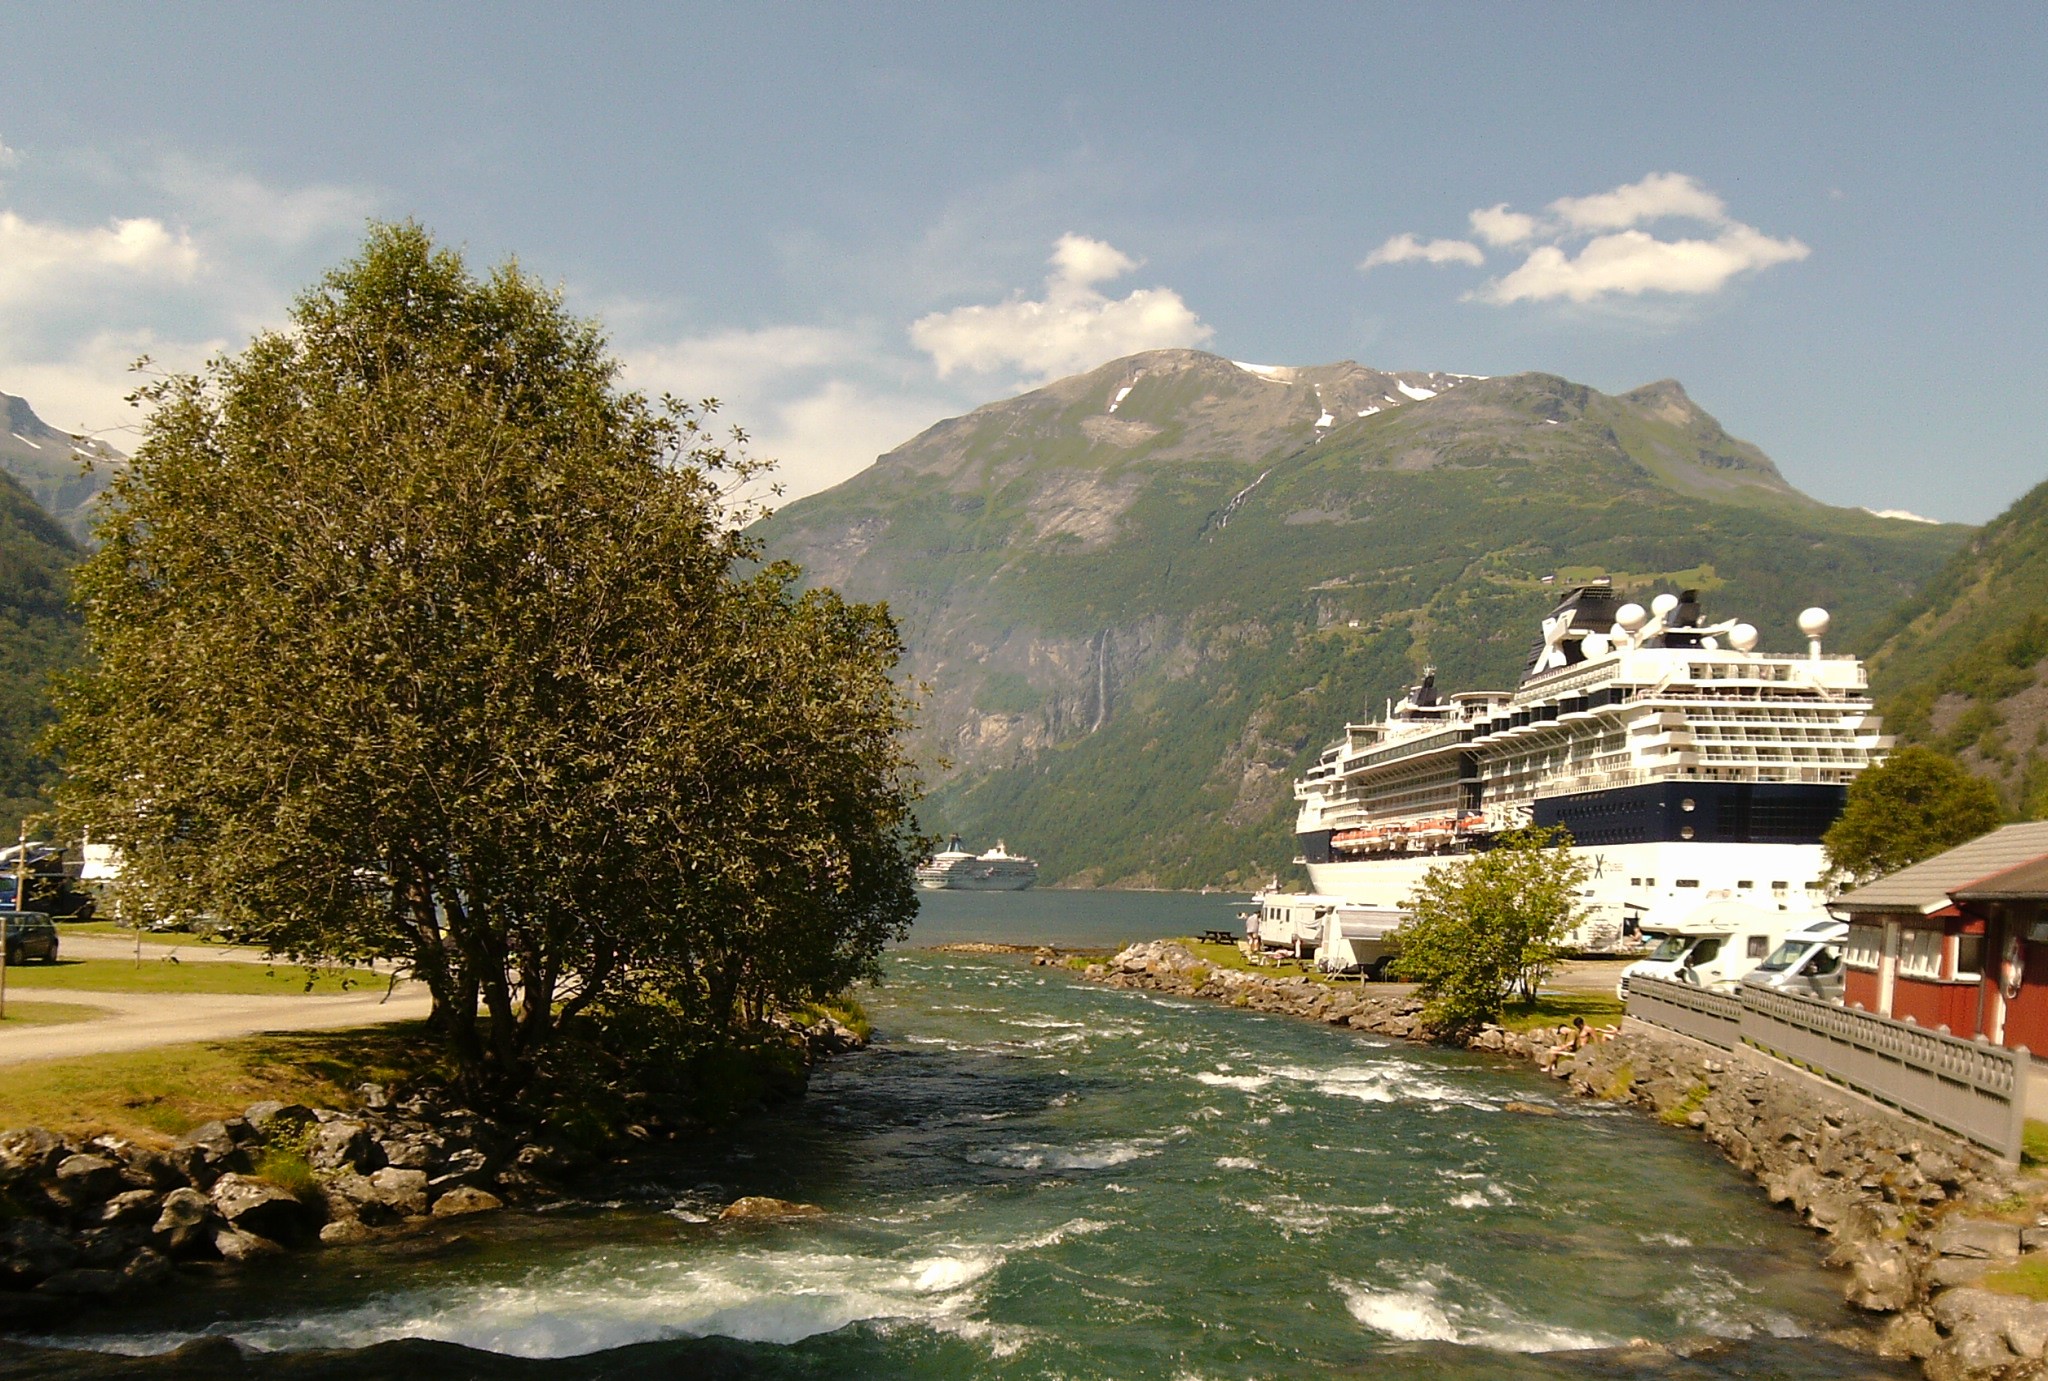 Our cruise ship in Norway